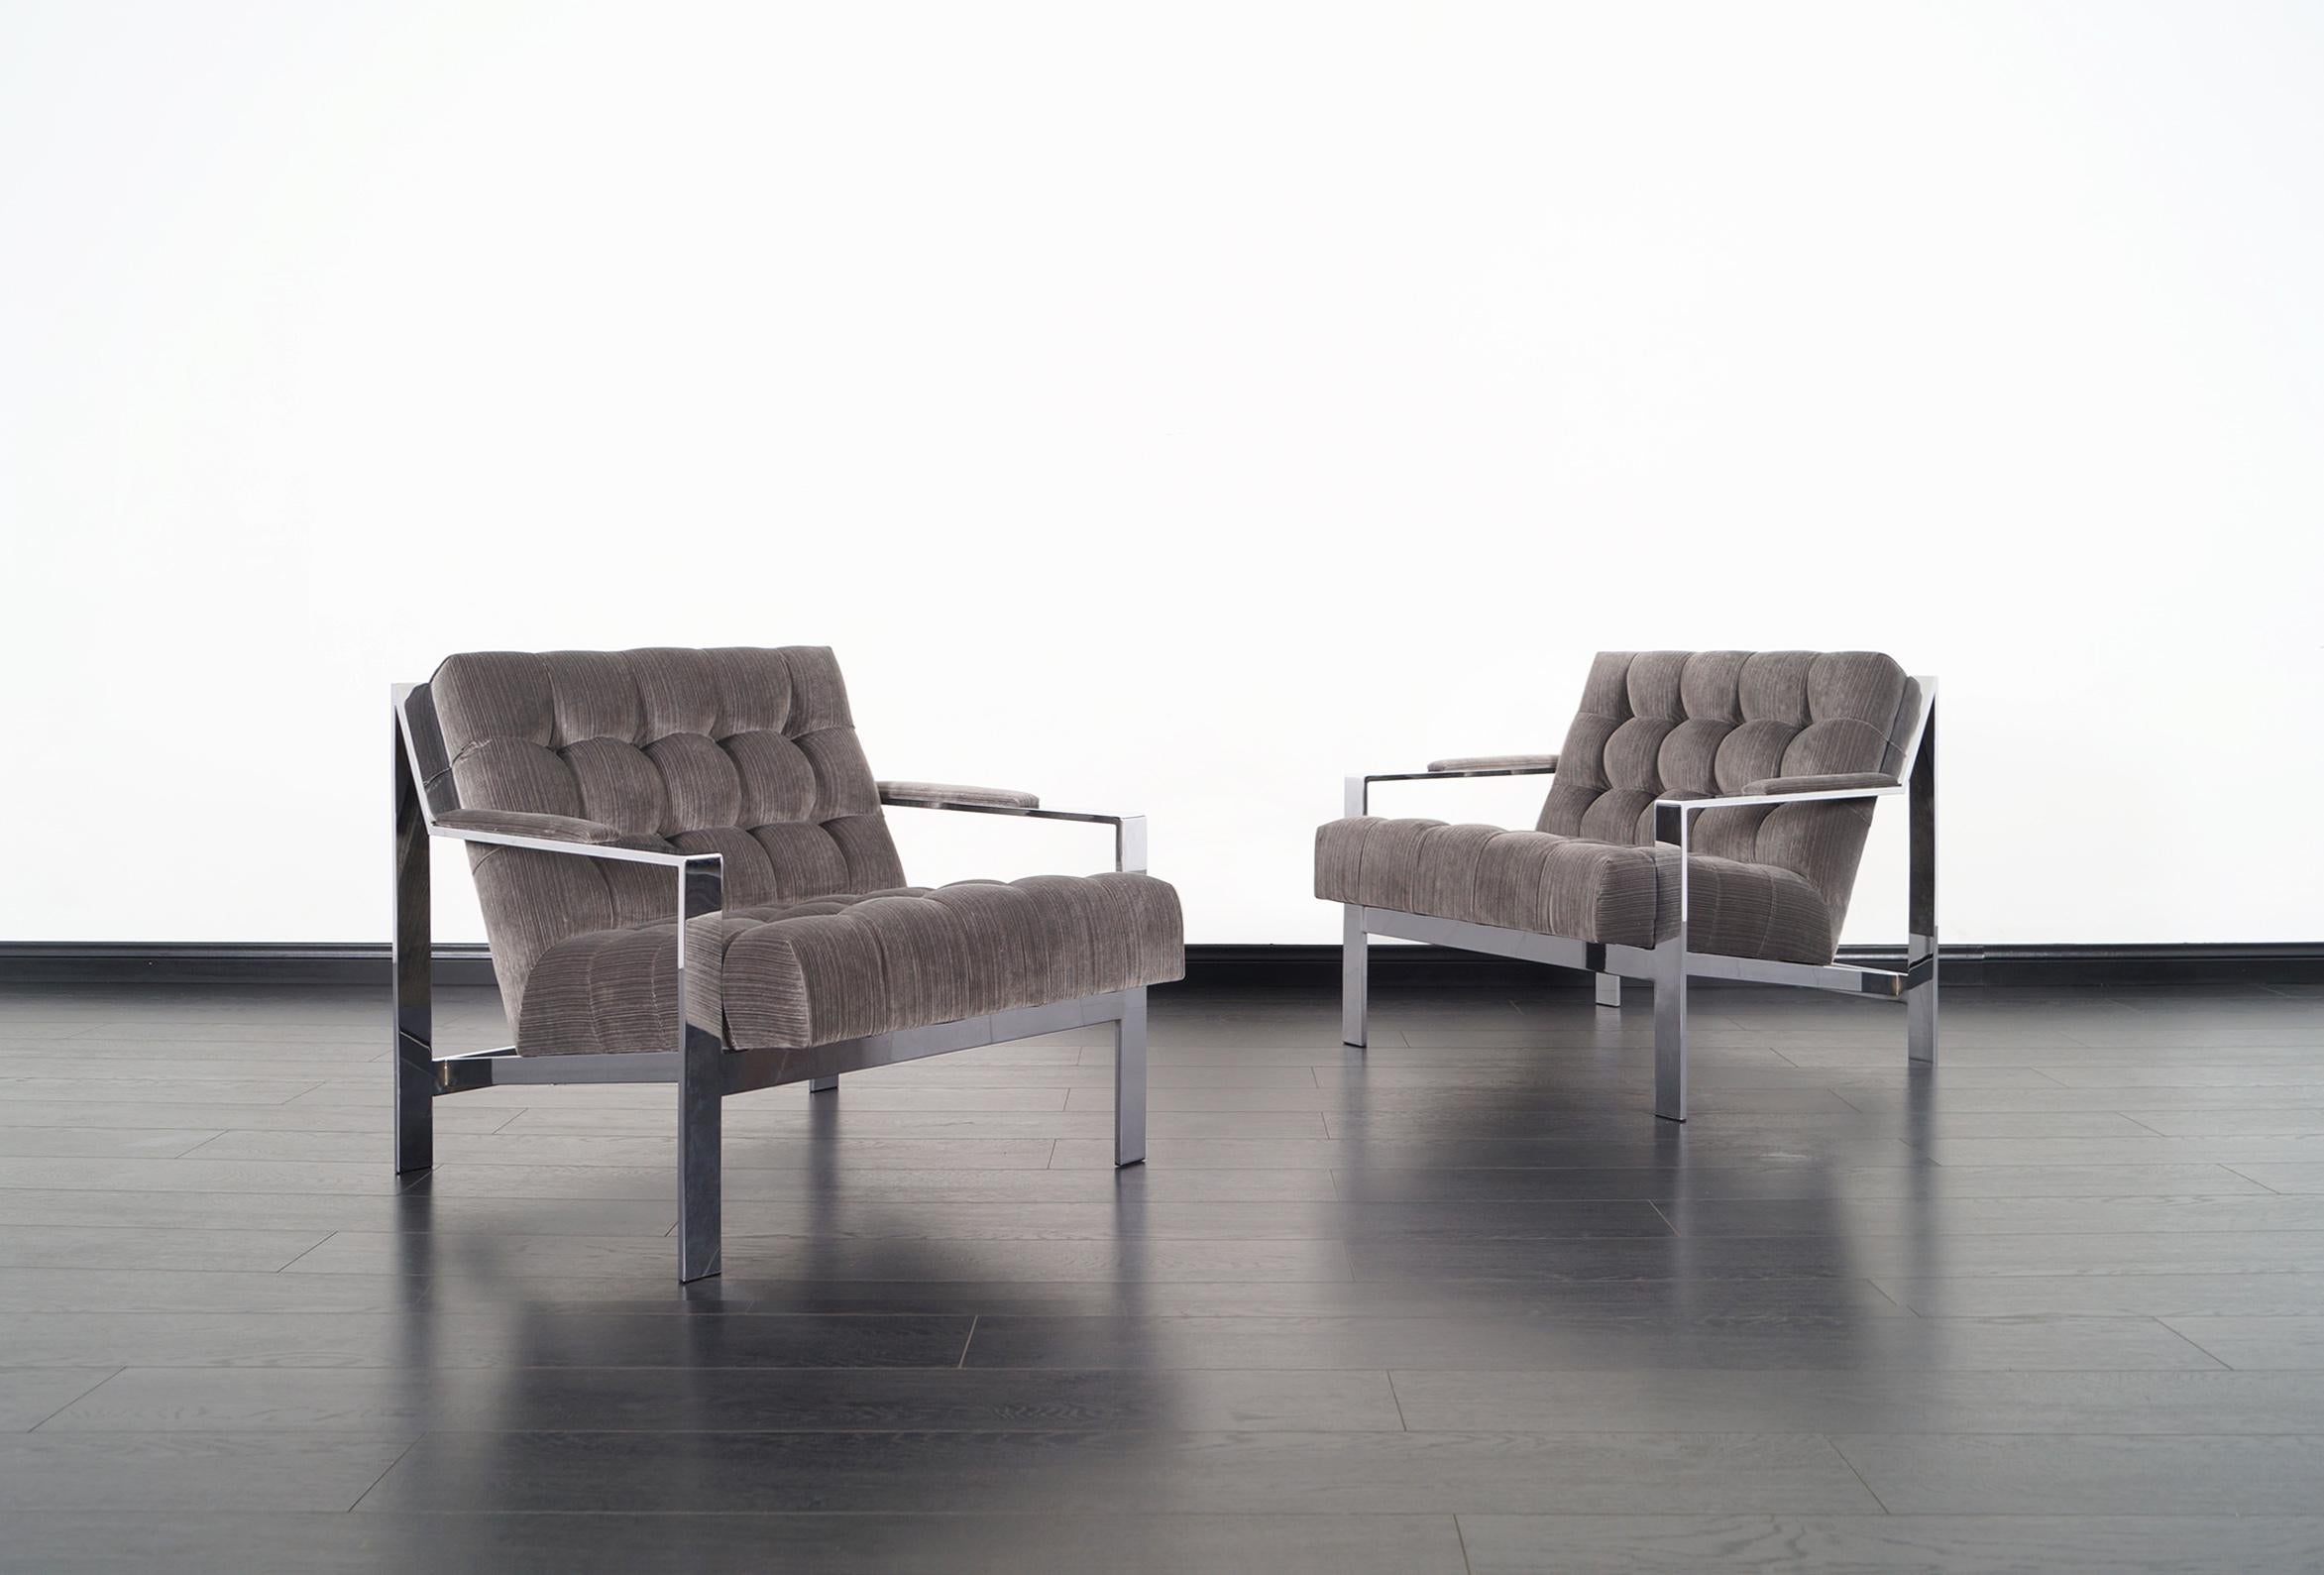 Amazing pair of vintage chrome lounge chairs designed by Cy Mann in the United States, circa 1970s. The chrome frames give the design an amazing perspective from any angle. These chairs are the perfect complement to enjoy a beautiful relaxing